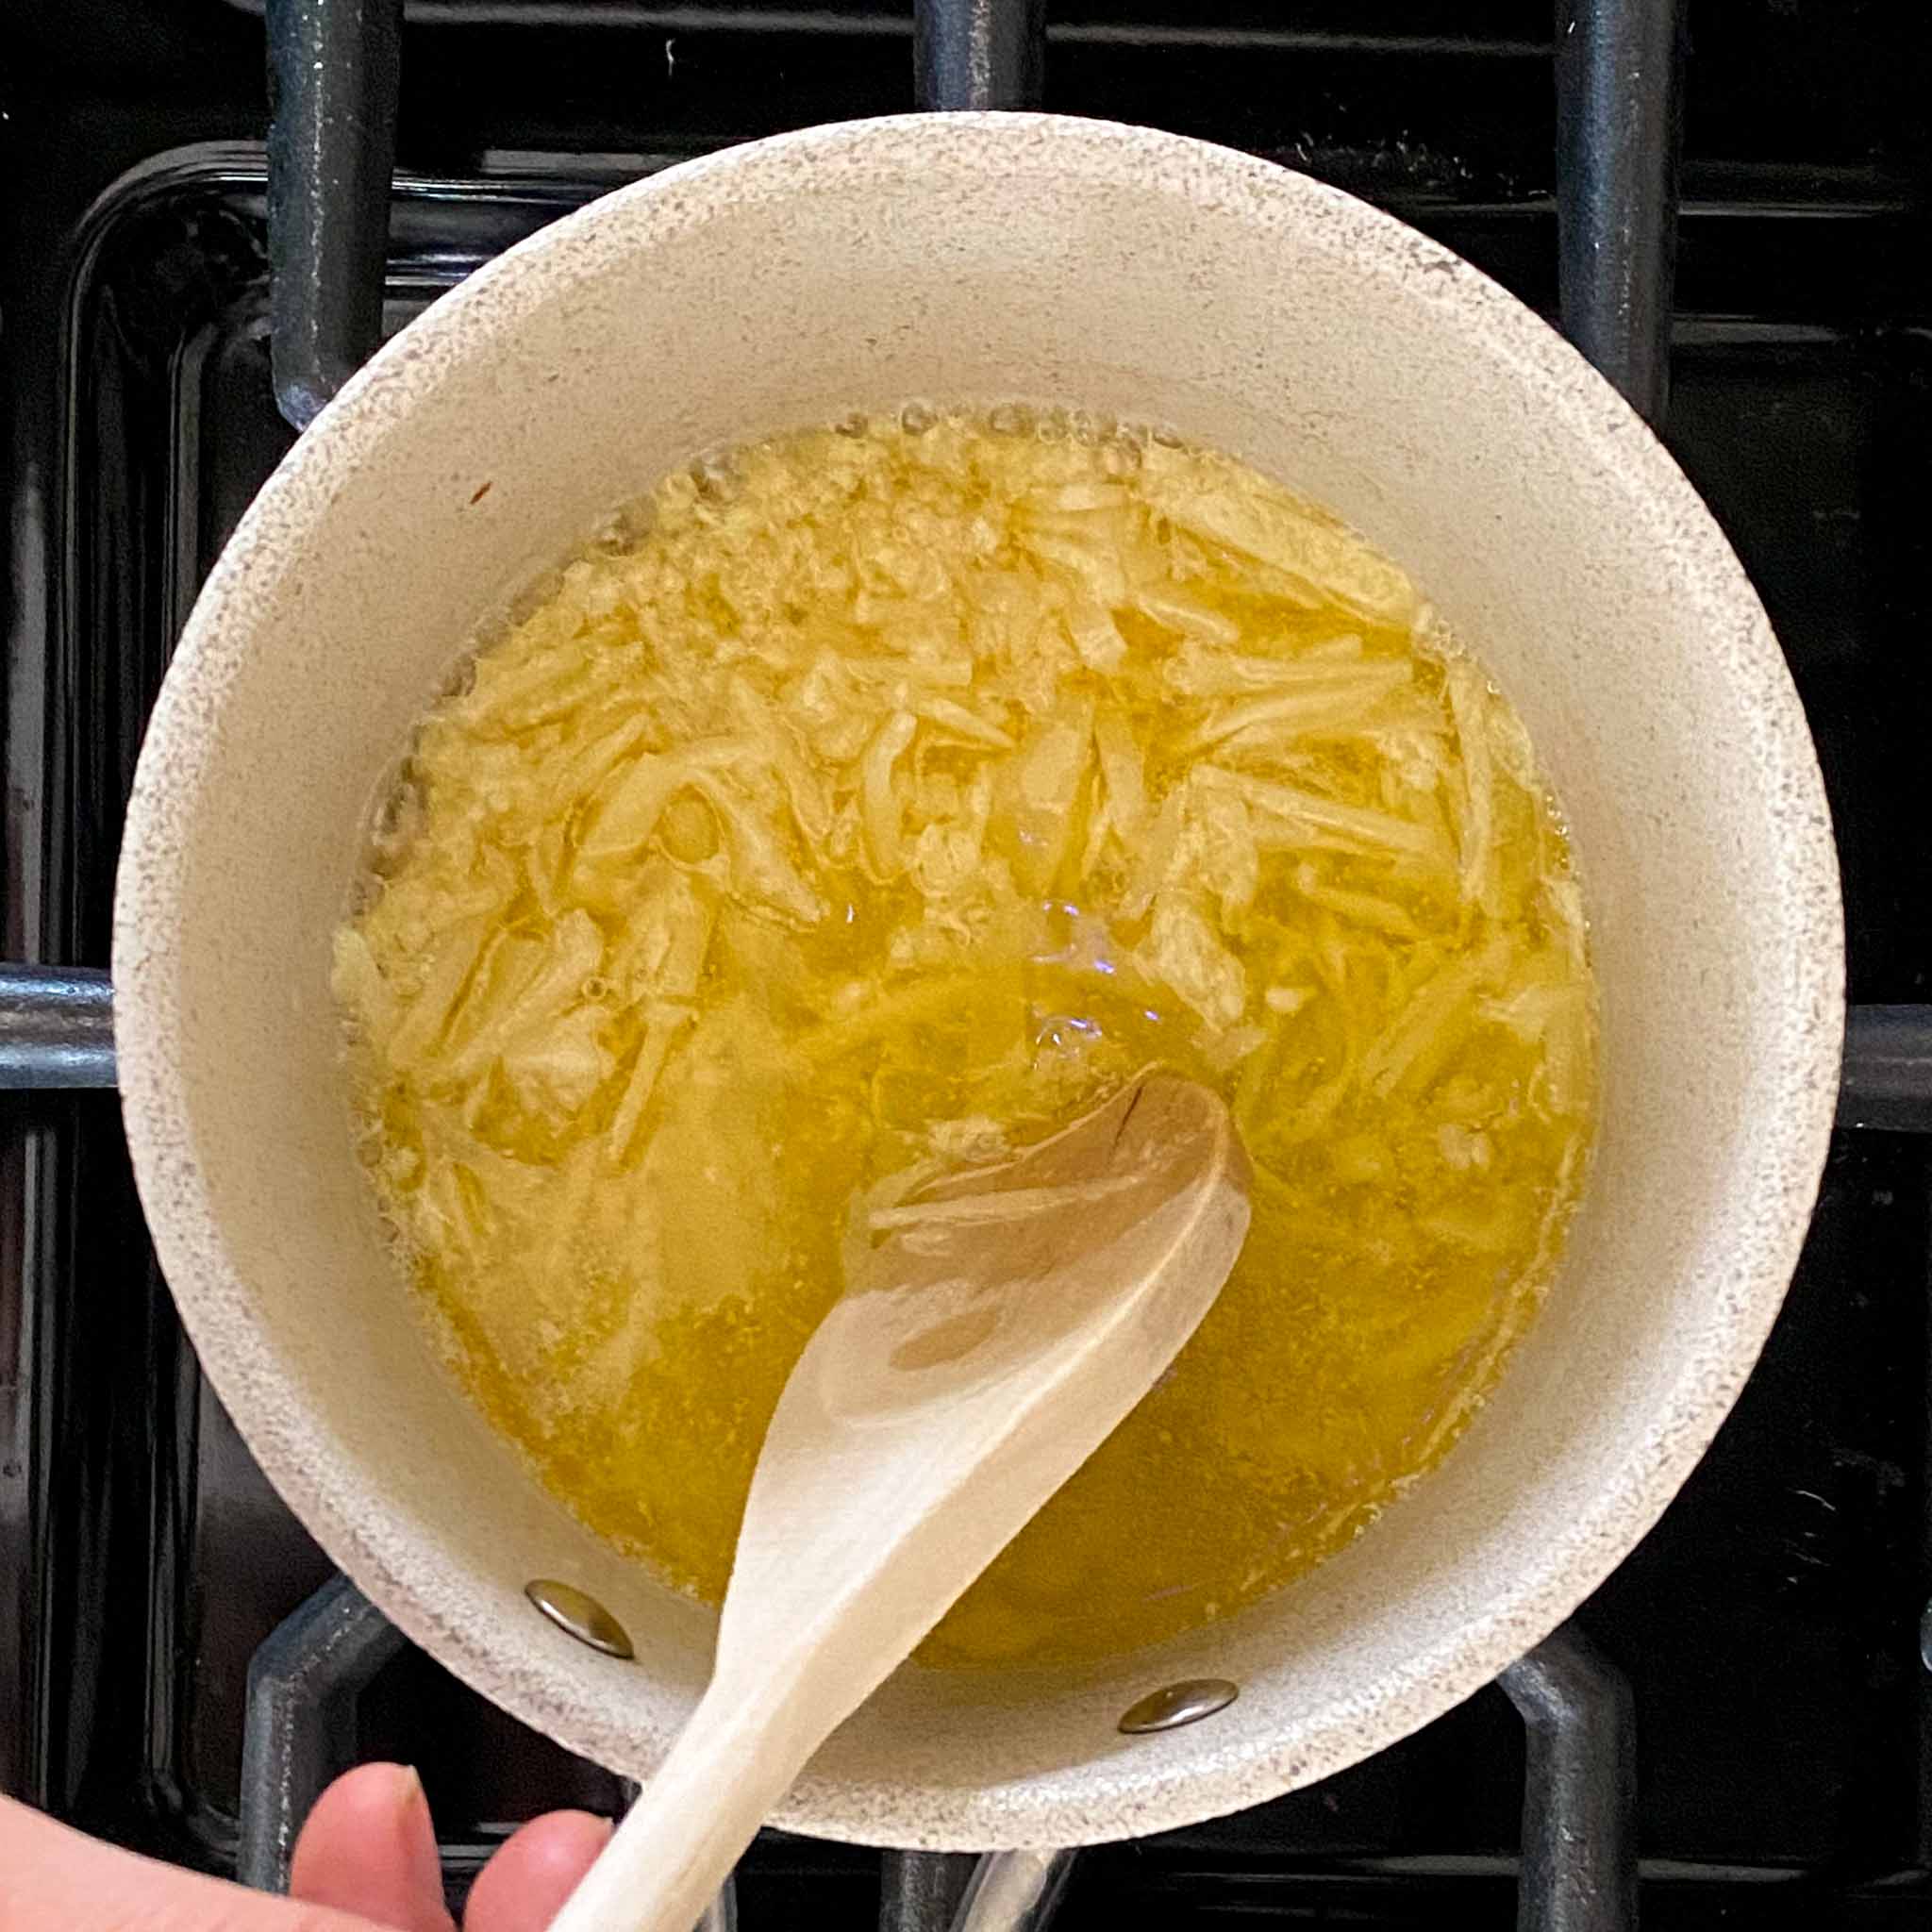 Parmesan being mixed into butter to make a wing sauce.